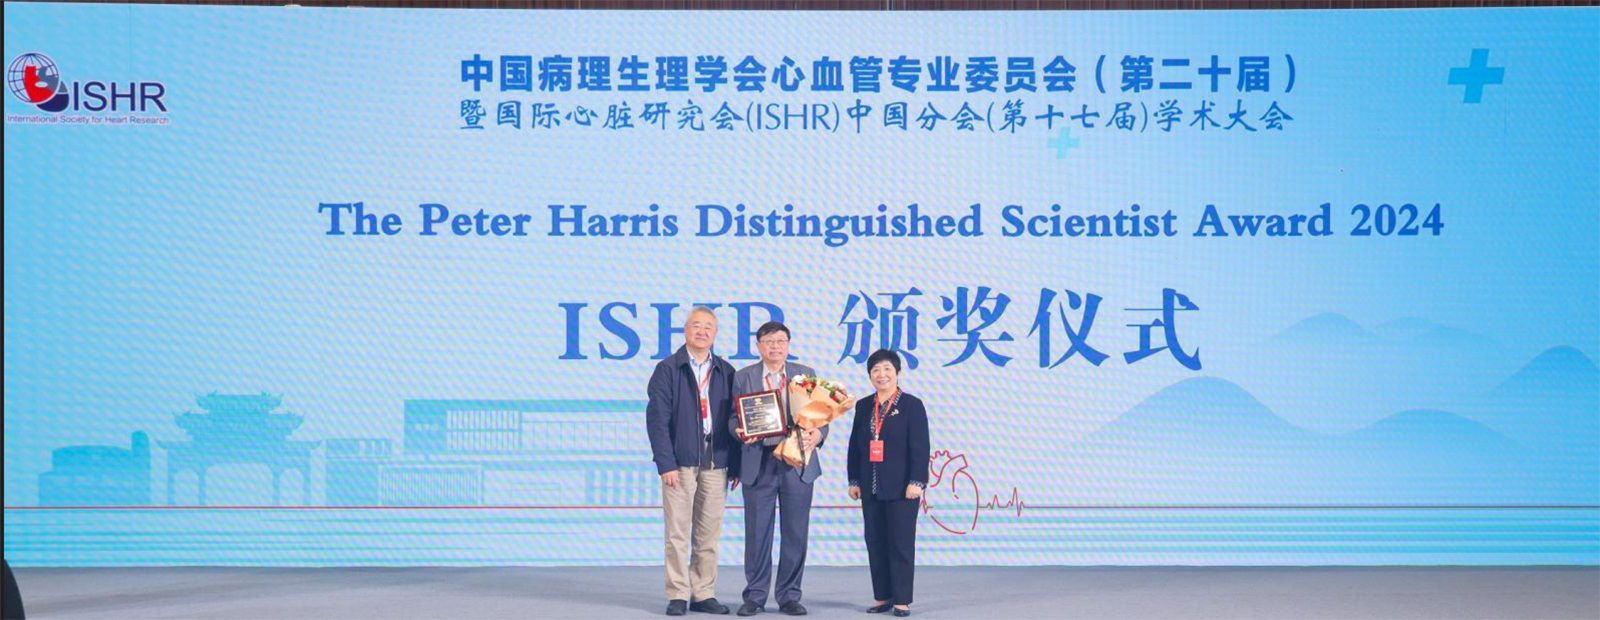 Professor Huang Yu (centre) receives the Peter Harris Distinguished Scientist Award 2024 from the International Society for Heart Research.